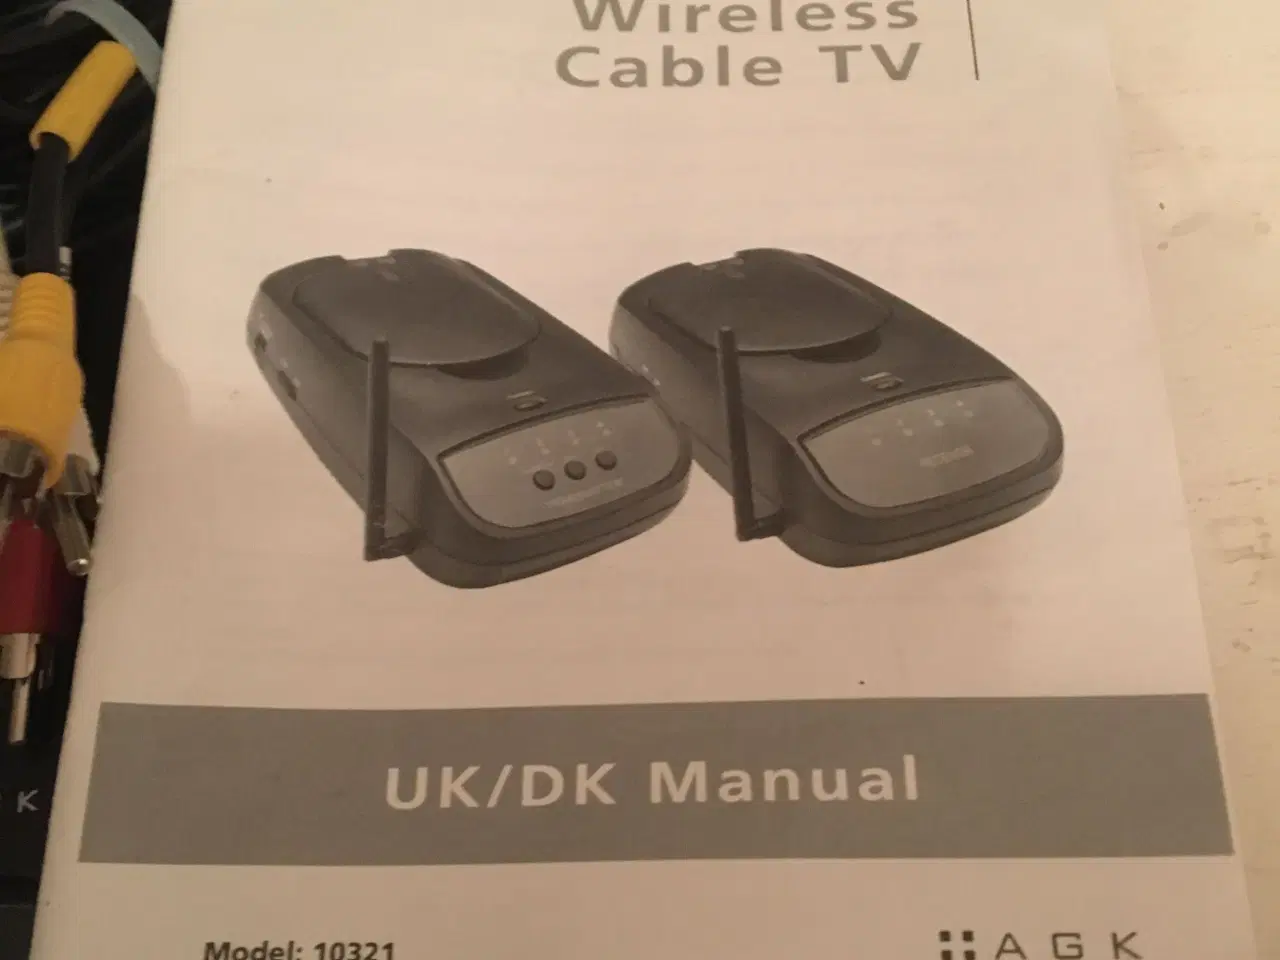 Billede 1 - wireless cable tv 